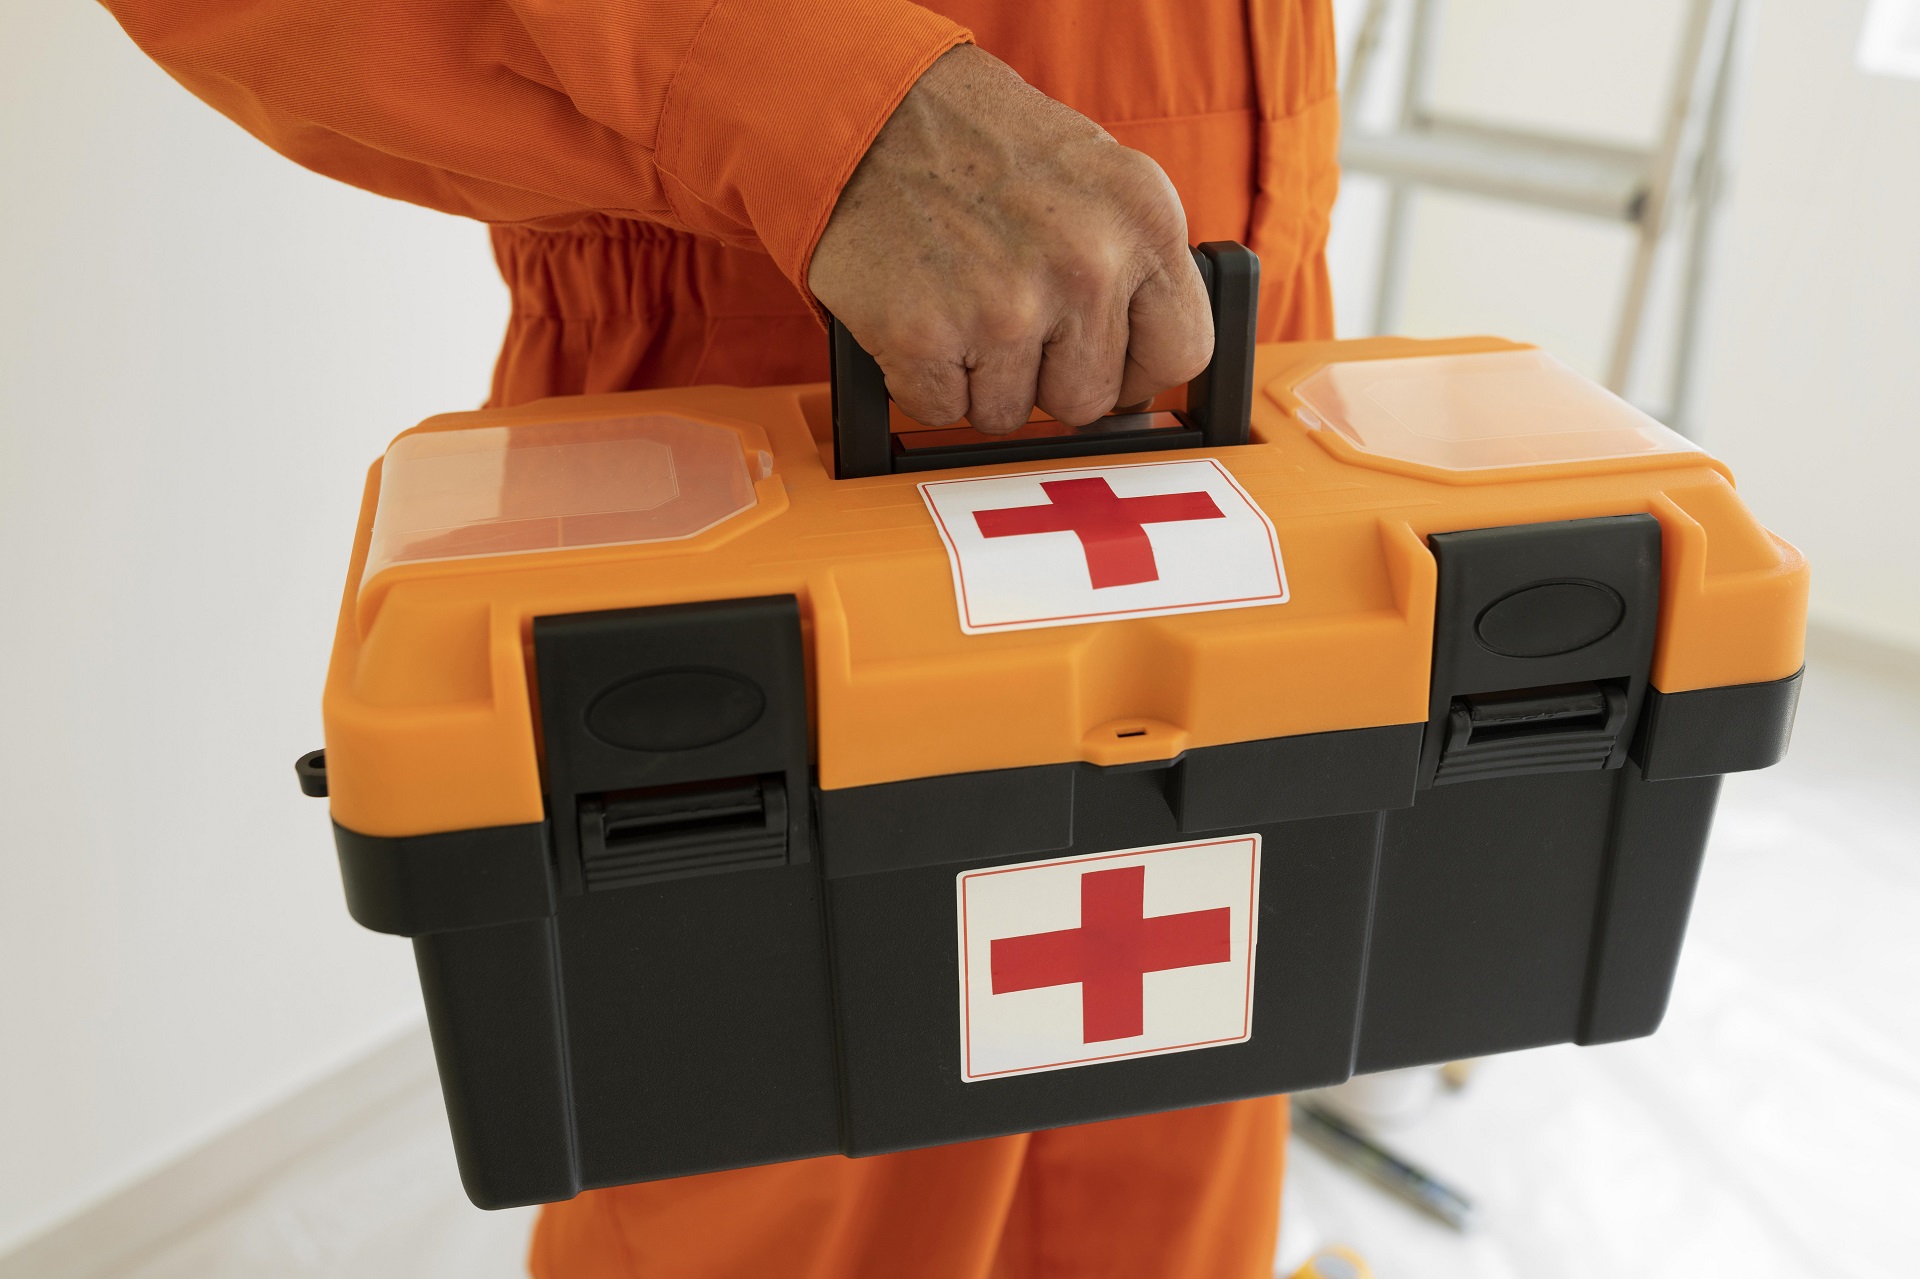 Importance of First Aid and Emergency Response Skills